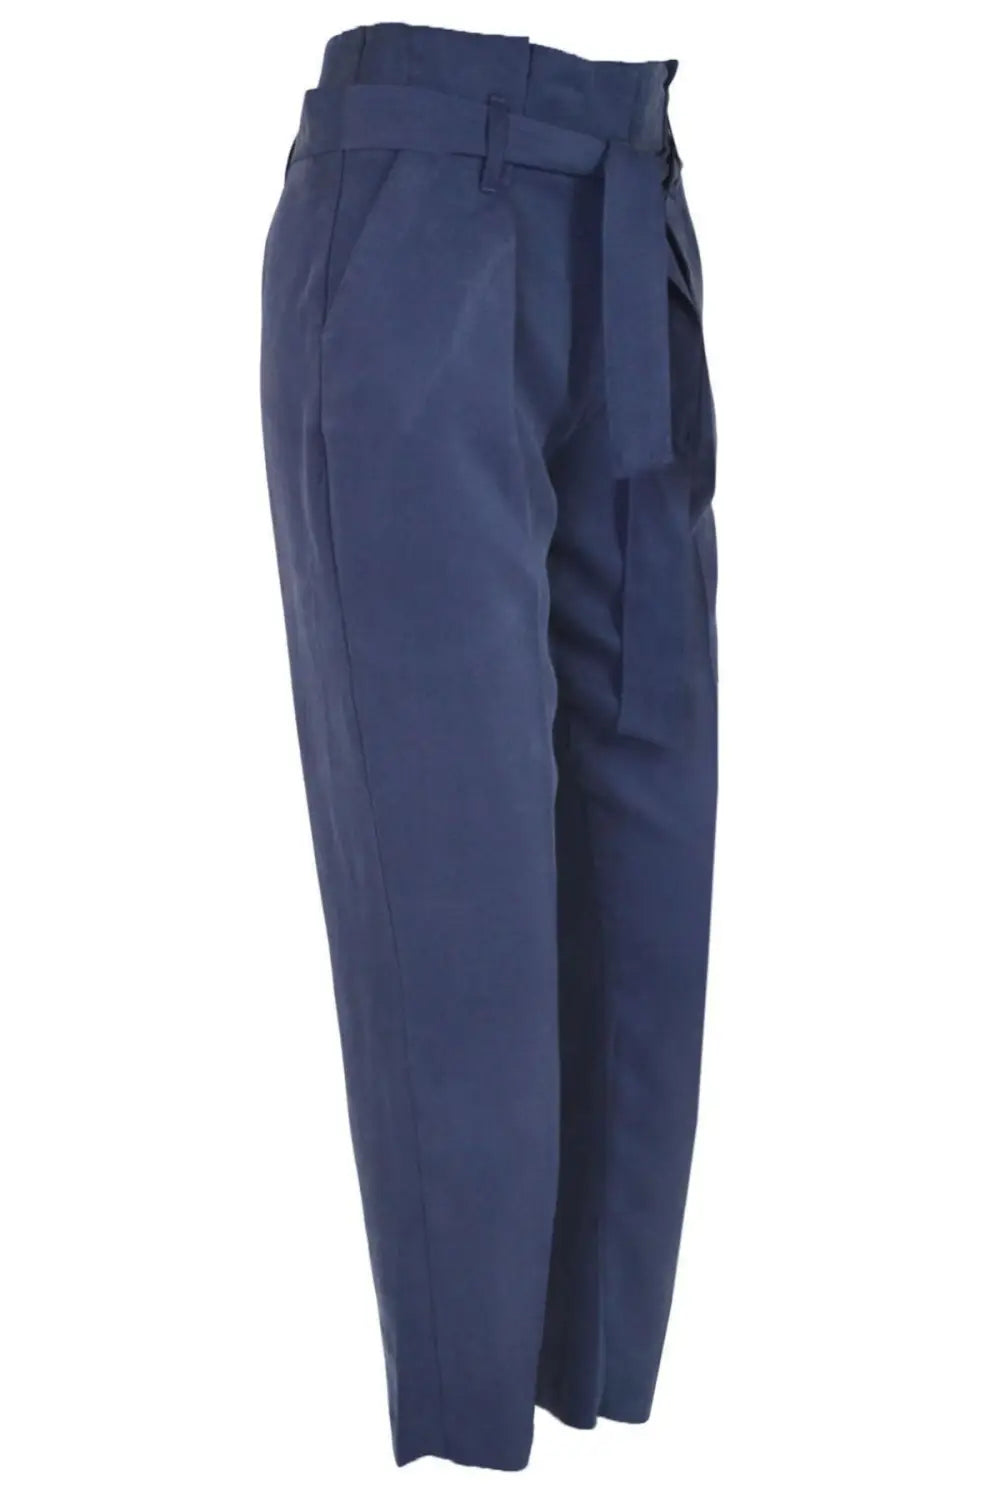 M&S Tapered Lightweight Trousers